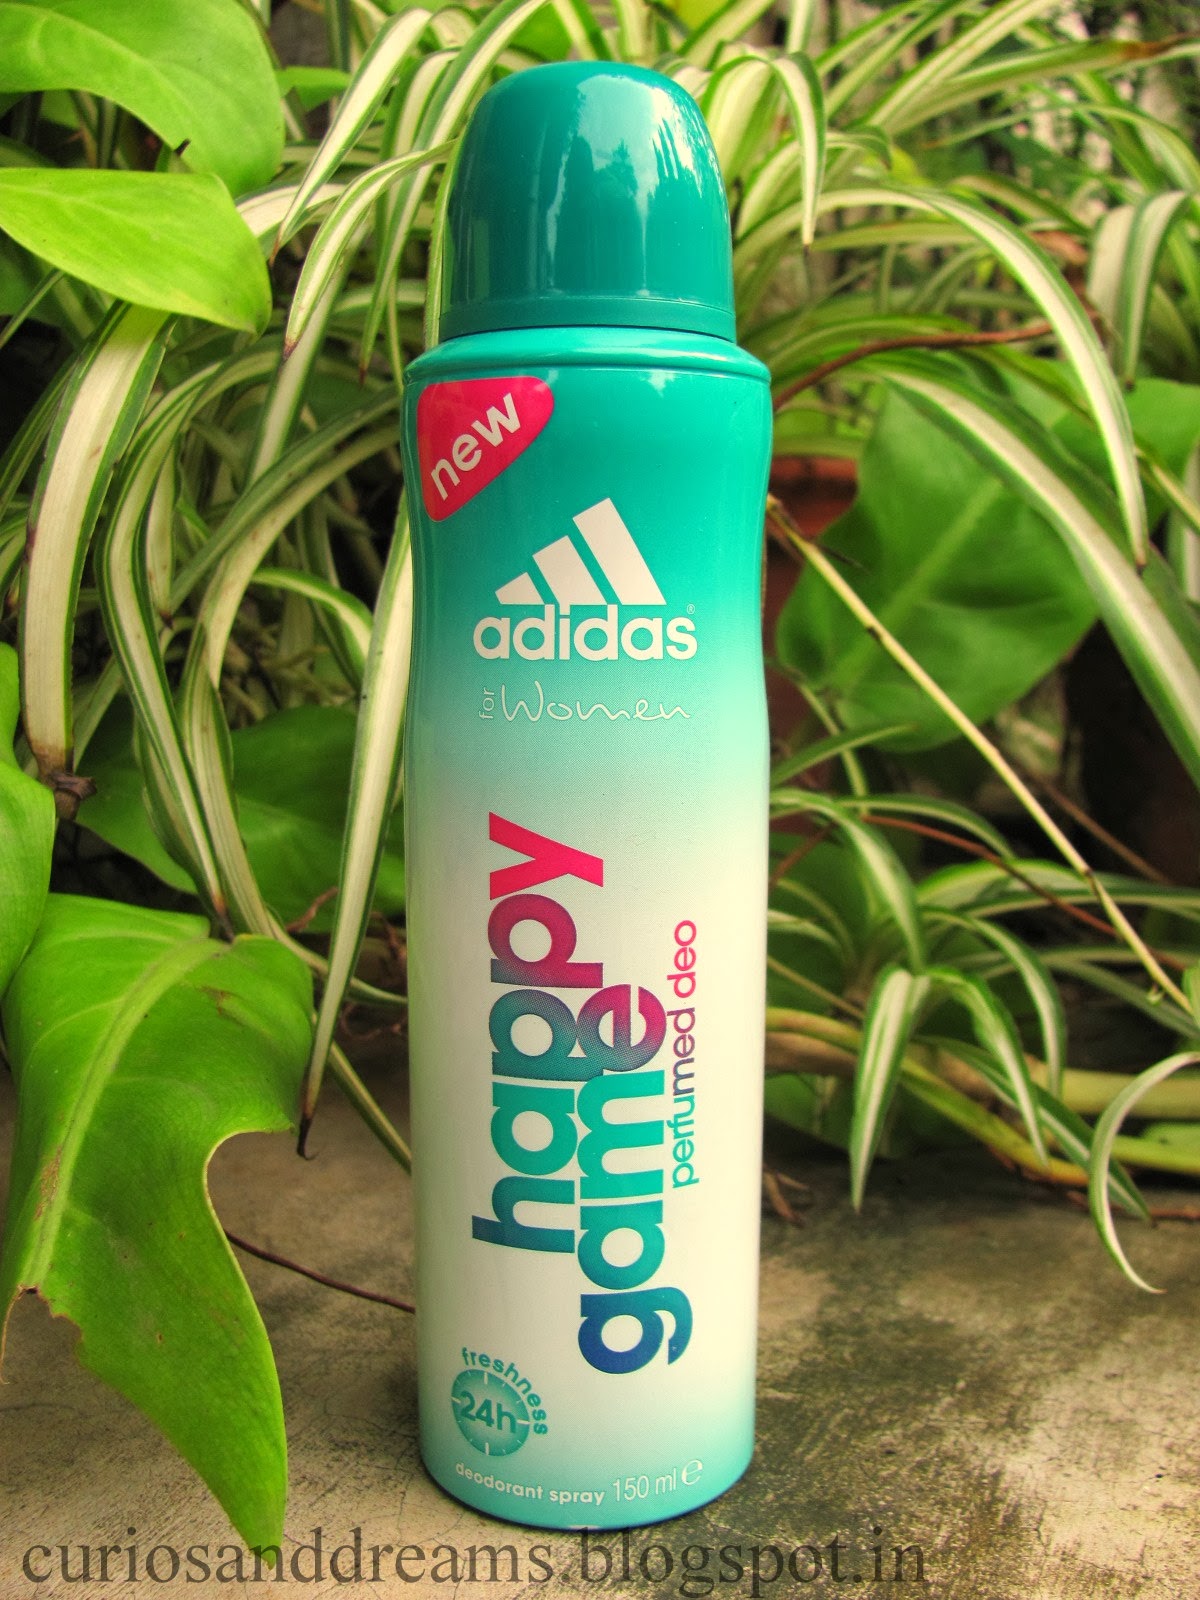 Adidas Happy Game deo review